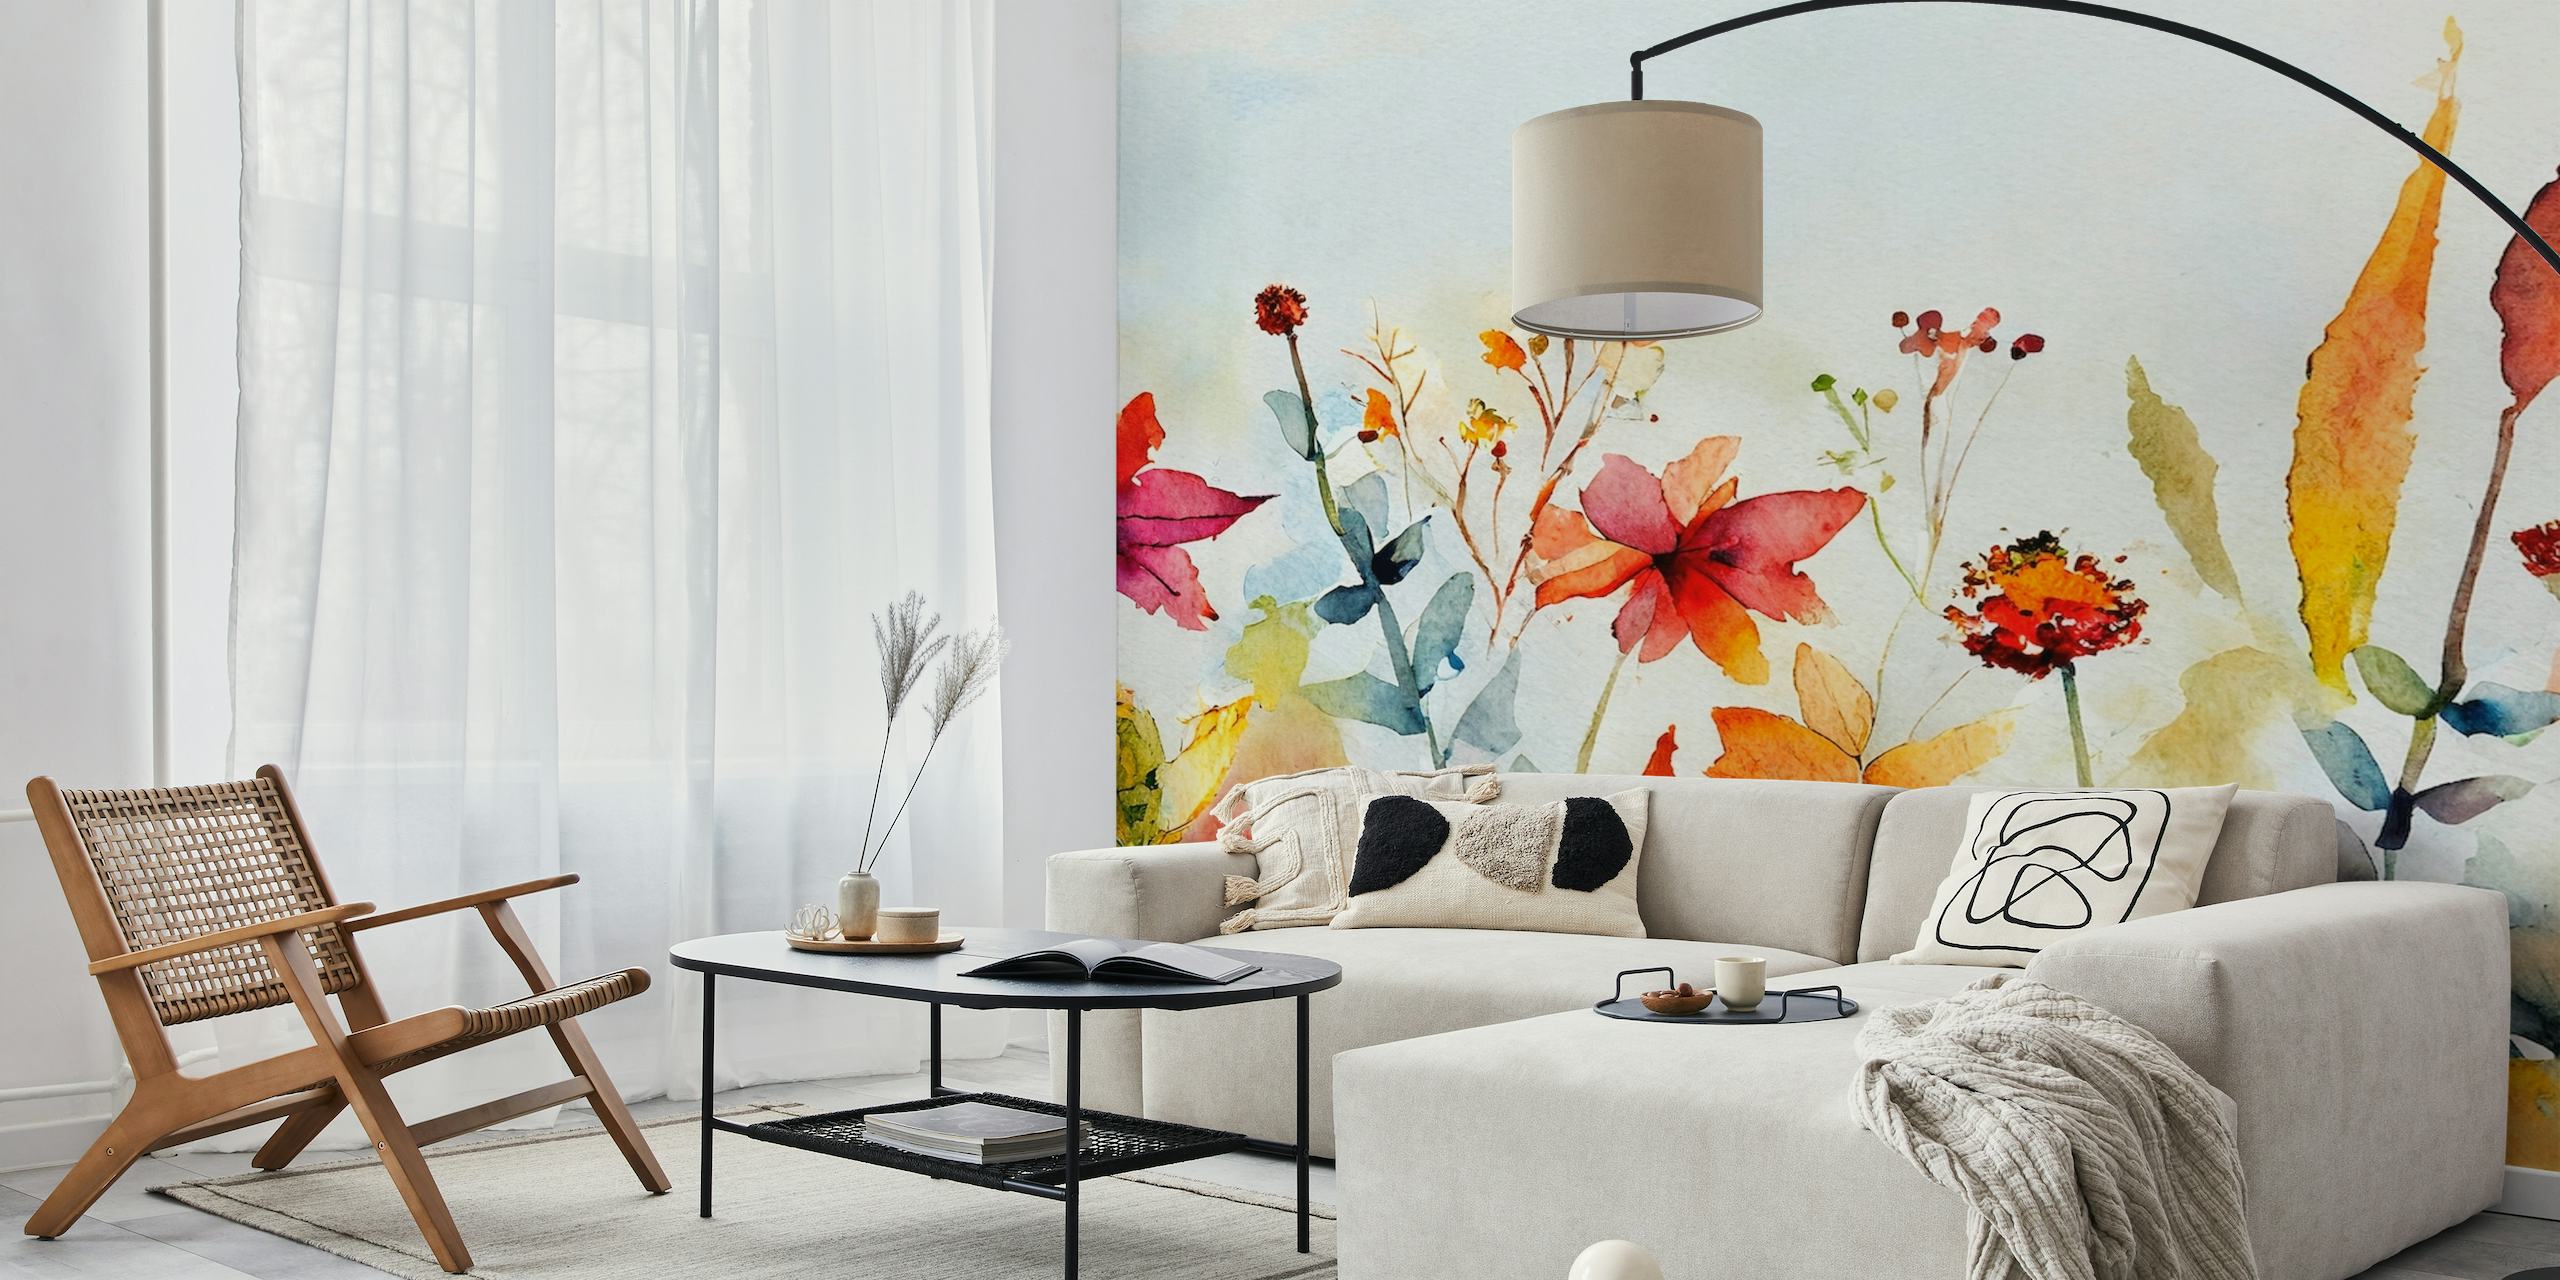 Watercolor painting of meadow flowers with vibrant colors on a wall mural